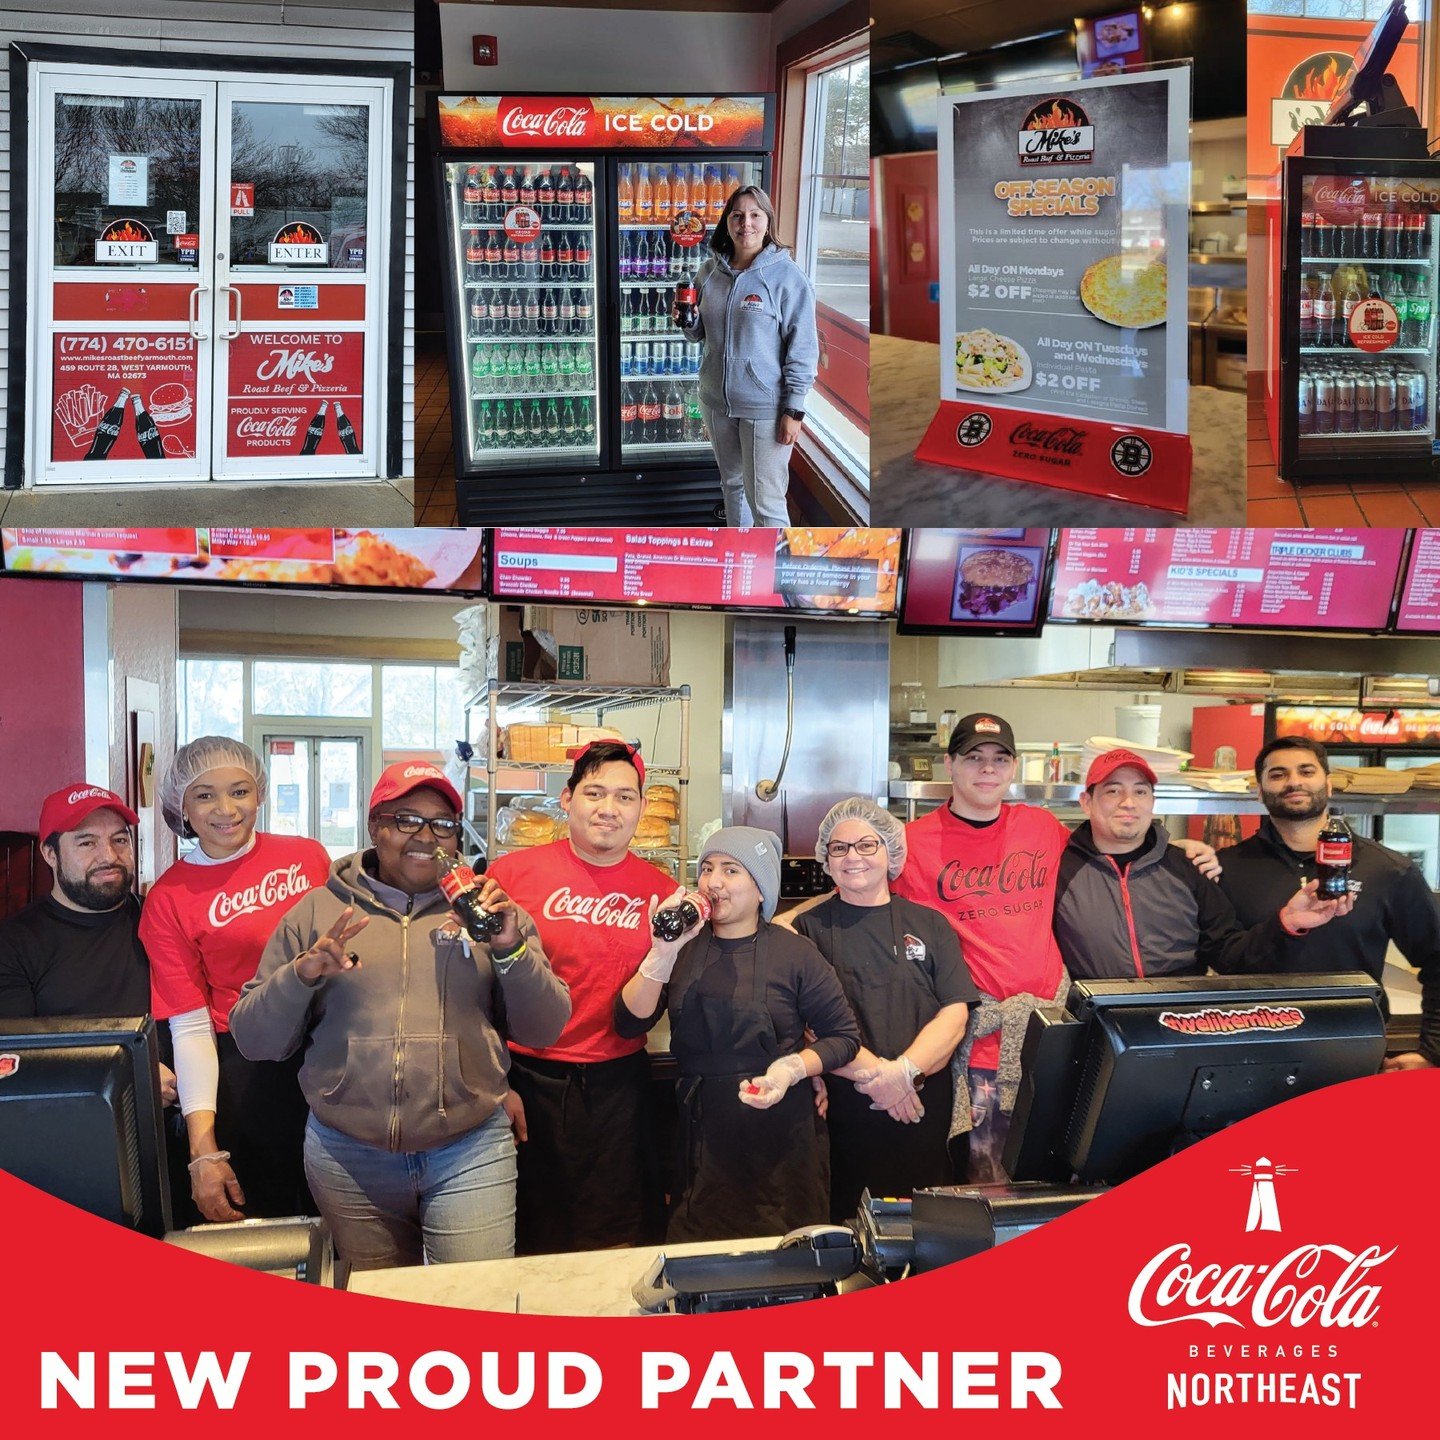 New Proud Partner!! Mike's Roast Beef &amp; Pizzeria is now serving delicious Coca-Cola products. We are so excited to add this great account to the Coke Northeast customer family and look forward to a successful partnership.

Mike's Roast Beef &amp;